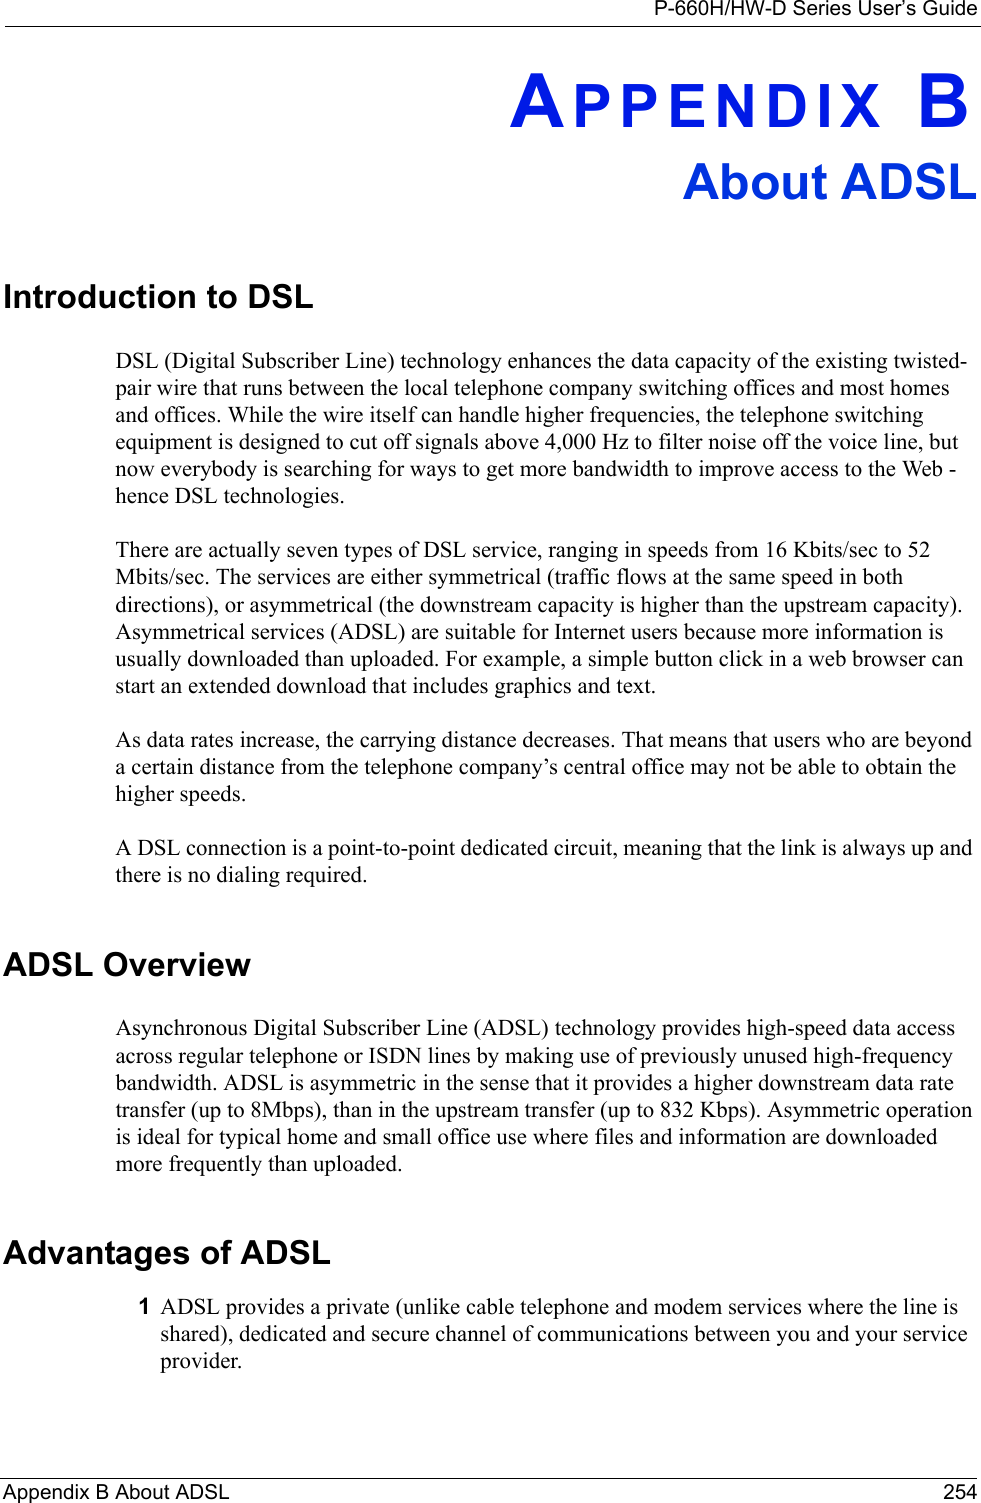 P-660H/HW-D Series User’s GuideAppendix B About ADSL 254APPENDIX BAbout ADSLIntroduction to DSLDSL (Digital Subscriber Line) technology enhances the data capacity of the existing twisted-pair wire that runs between the local telephone company switching offices and most homes and offices. While the wire itself can handle higher frequencies, the telephone switching equipment is designed to cut off signals above 4,000 Hz to filter noise off the voice line, but now everybody is searching for ways to get more bandwidth to improve access to the Web - hence DSL technologies. There are actually seven types of DSL service, ranging in speeds from 16 Kbits/sec to 52 Mbits/sec. The services are either symmetrical (traffic flows at the same speed in both directions), or asymmetrical (the downstream capacity is higher than the upstream capacity). Asymmetrical services (ADSL) are suitable for Internet users because more information is usually downloaded than uploaded. For example, a simple button click in a web browser can start an extended download that includes graphics and text.As data rates increase, the carrying distance decreases. That means that users who are beyond a certain distance from the telephone company’s central office may not be able to obtain the higher speeds.A DSL connection is a point-to-point dedicated circuit, meaning that the link is always up and there is no dialing required.ADSL OverviewAsynchronous Digital Subscriber Line (ADSL) technology provides high-speed data access across regular telephone or ISDN lines by making use of previously unused high-frequency bandwidth. ADSL is asymmetric in the sense that it provides a higher downstream data rate transfer (up to 8Mbps), than in the upstream transfer (up to 832 Kbps). Asymmetric operation is ideal for typical home and small office use where files and information are downloaded more frequently than uploaded.Advantages of ADSL1ADSL provides a private (unlike cable telephone and modem services where the line is shared), dedicated and secure channel of communications between you and your service provider. 